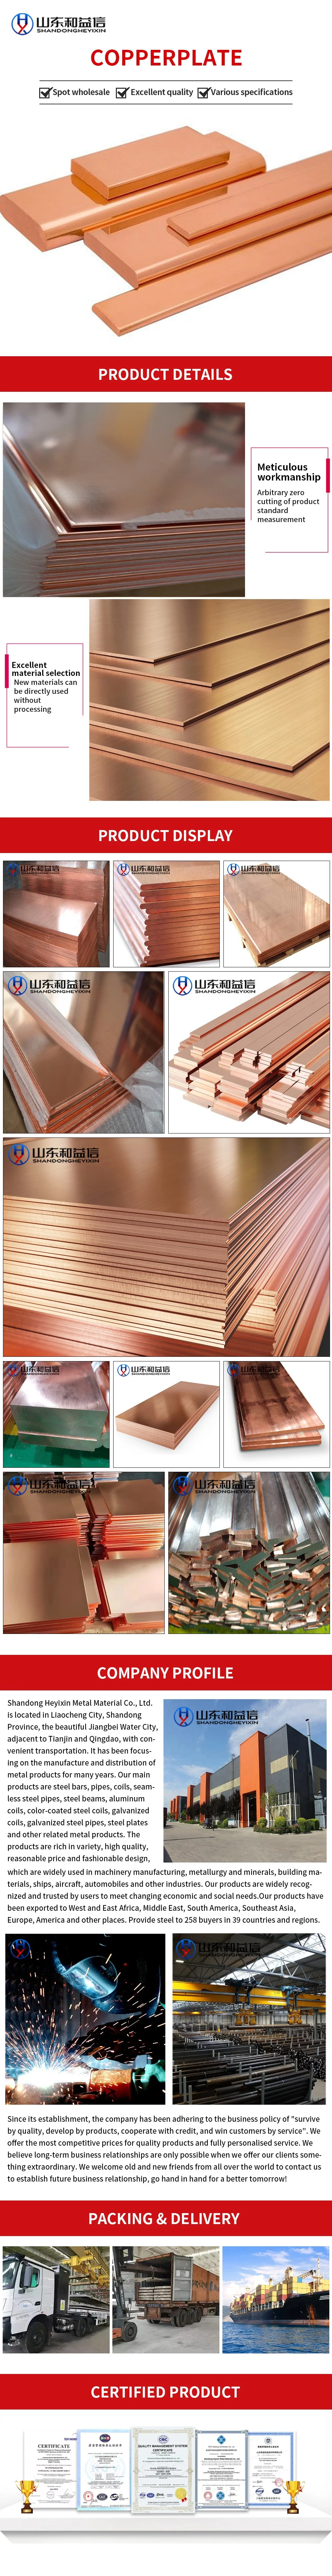 Low Price and Good Quality China-Made 1m 3m 5m 10m Length Alloy Sheets Tungsten Copper Plate